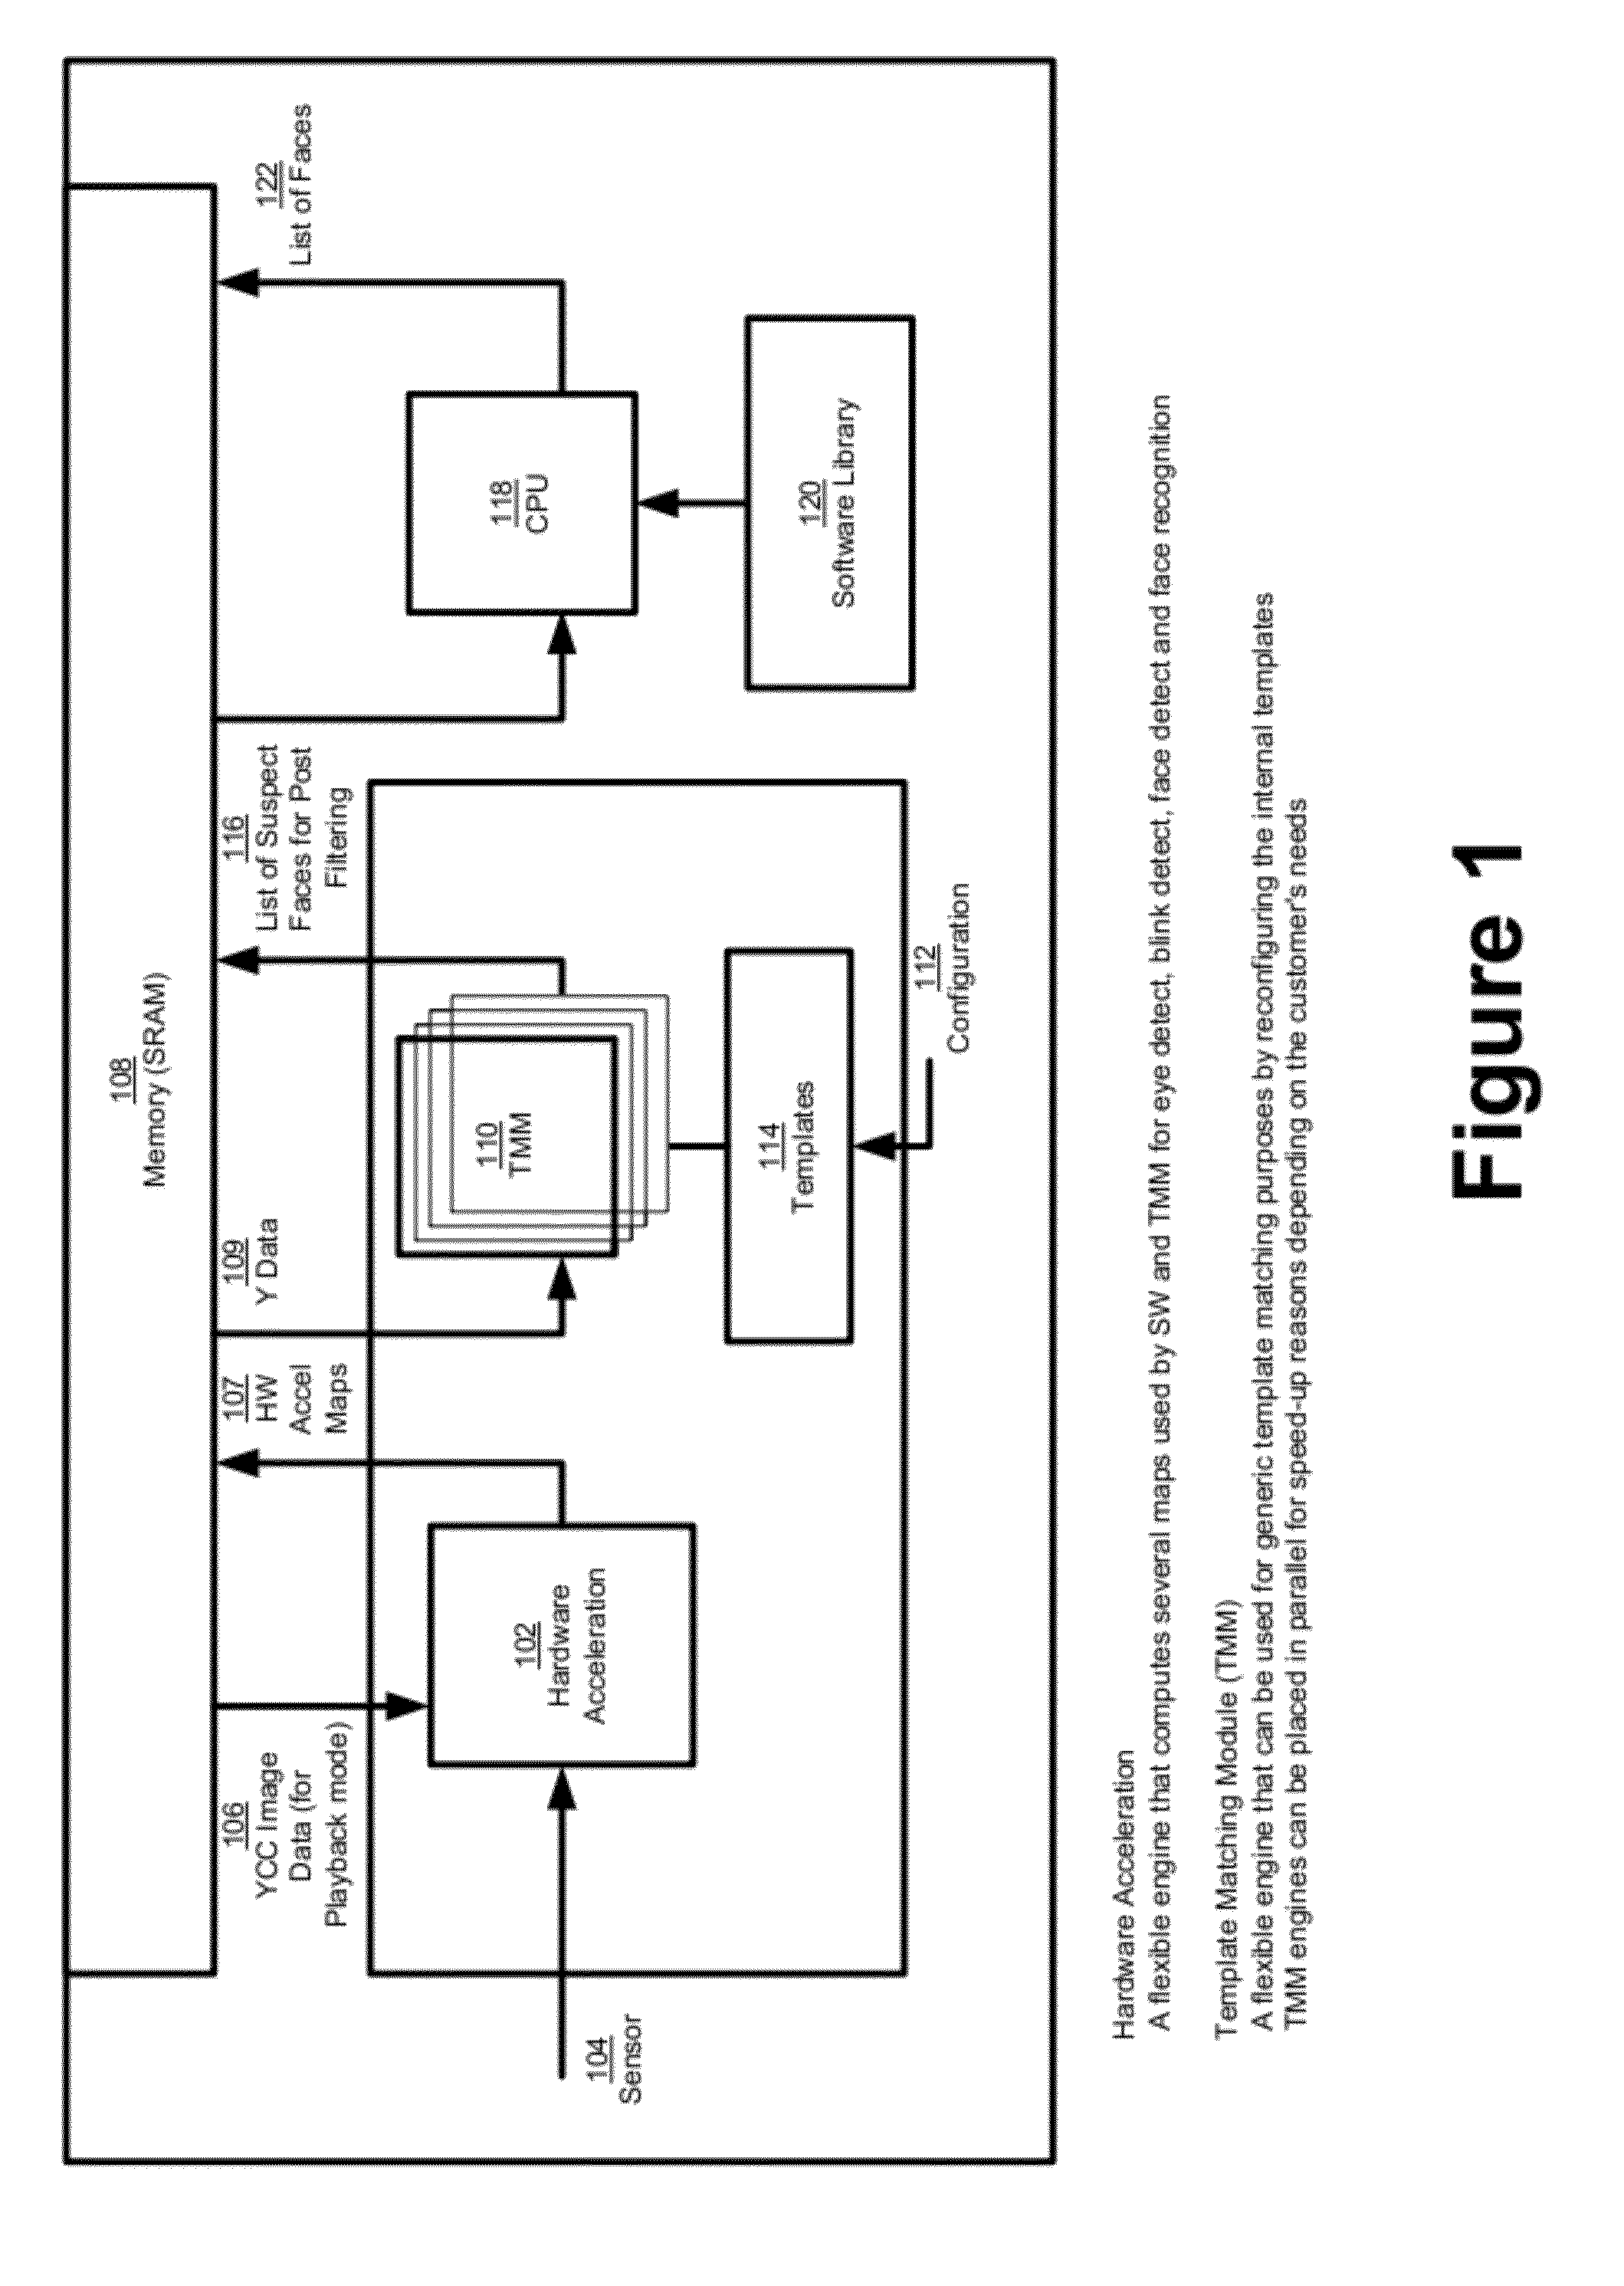 Face or Other Object Detection Including Template Matching